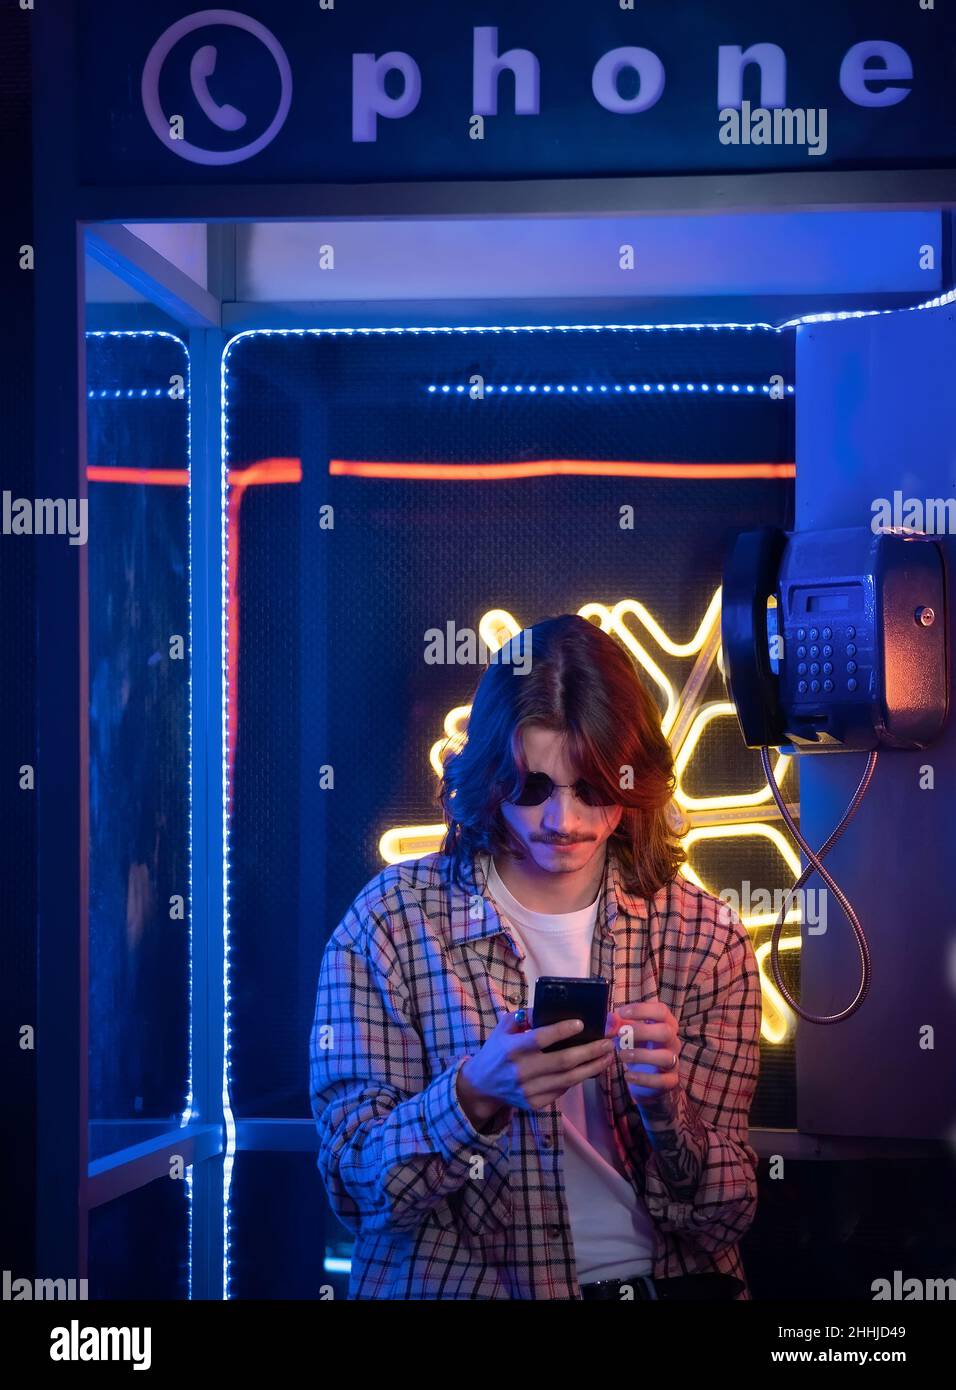 Millennial man in old phone box using smartphone and enjoying retro style. Nostalgia and neon light Stock Photo